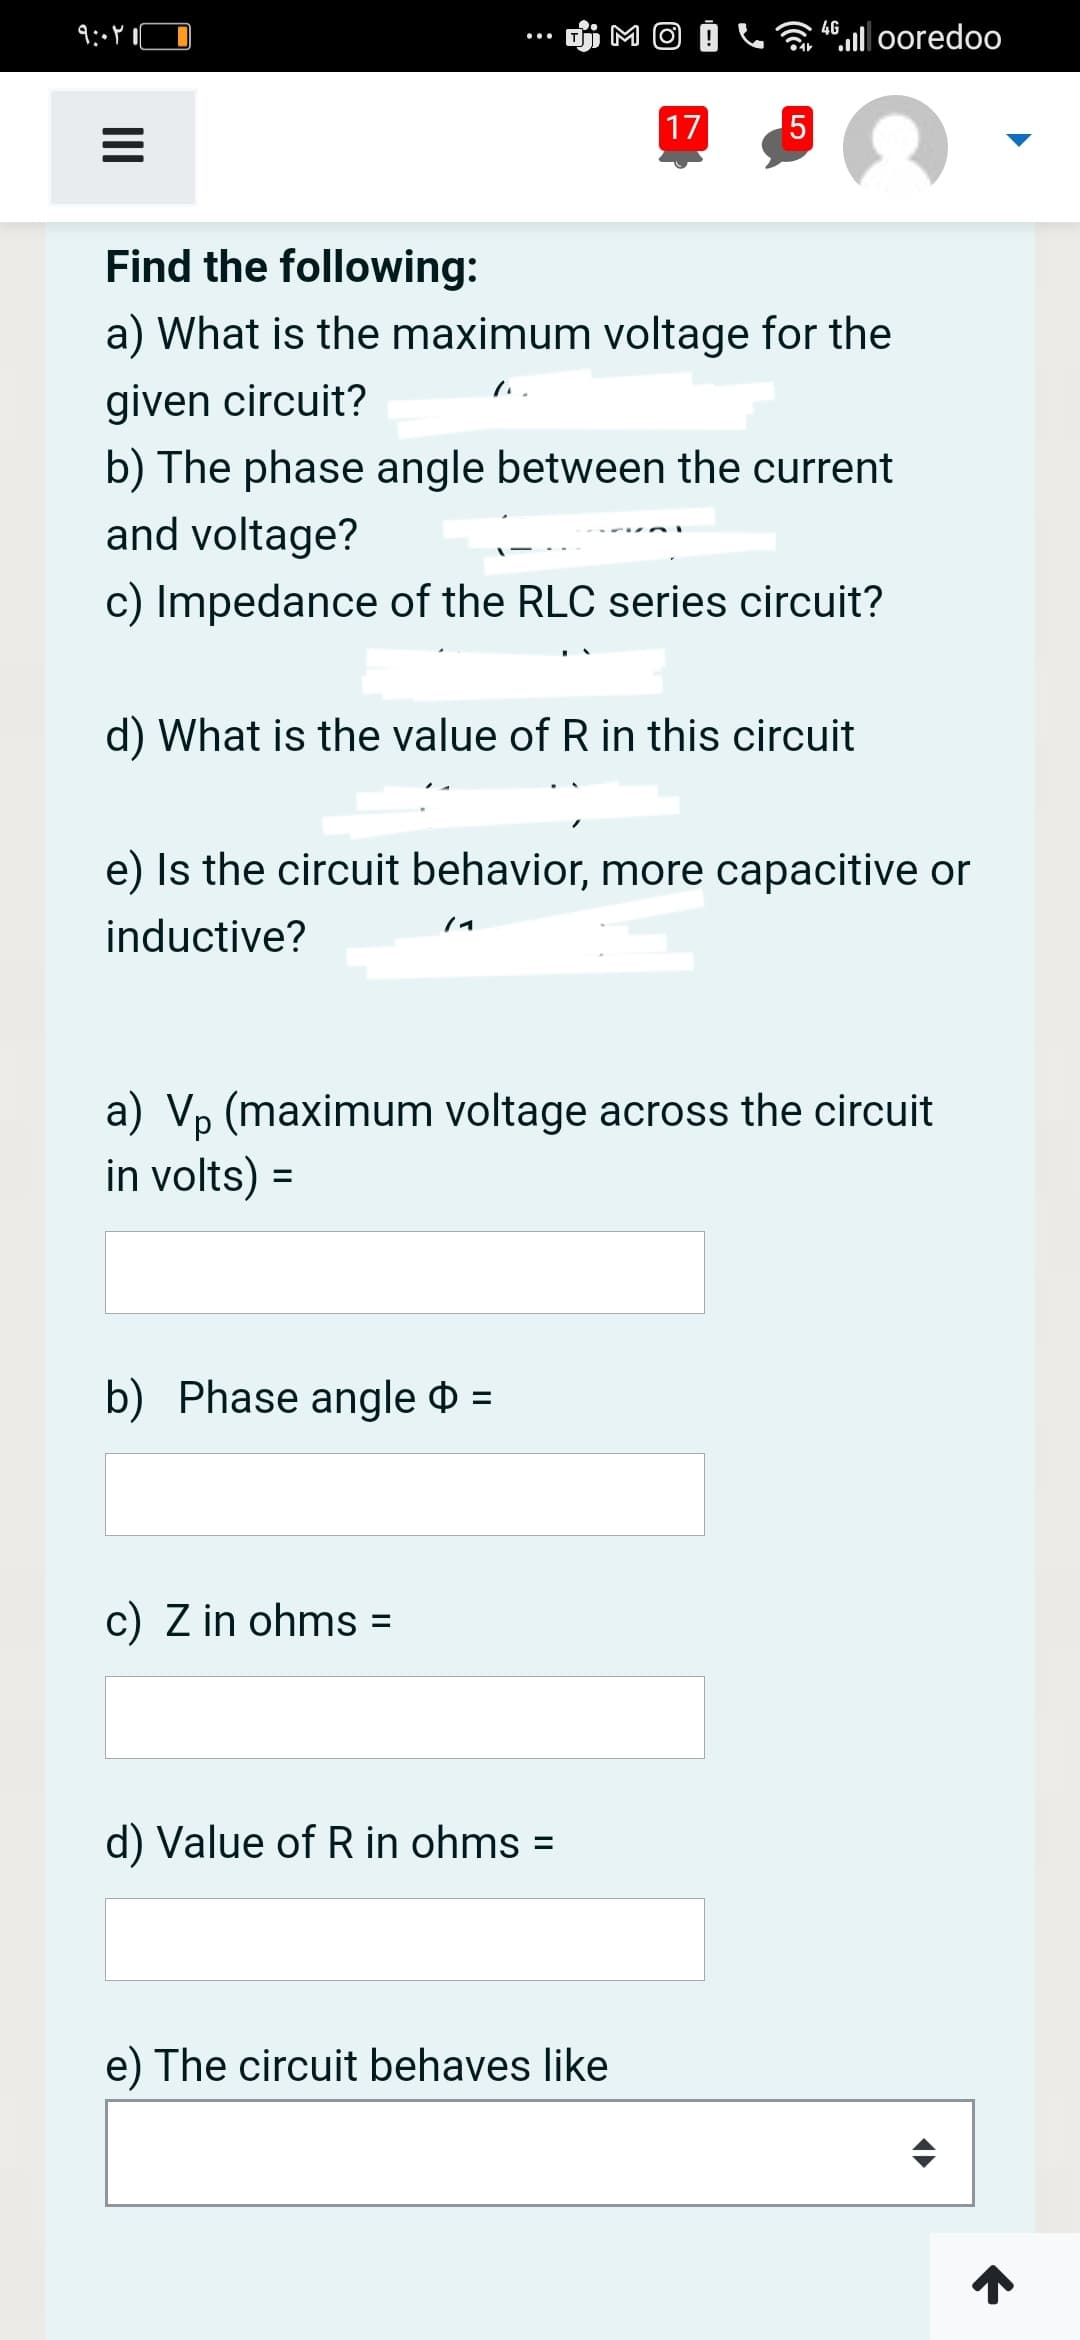 4.l 0oredoo
17
5
Find the following:
a) What is the maximum voltage for the
given circuit?
*リ
b) The phase angle between the current
and voltage?
c) Impedance of the RLC series circuit?
d) What is the value of R in this circuit
e) Is the circuit behavior, more capacitive or
/イ
inductive?
a) Vp (maximum voltage across the circuit
in volts) =
b) Phase angle $ =
c) Z in ohms =
d) Value of R in ohms =
%3D
e) The circuit behaves like
